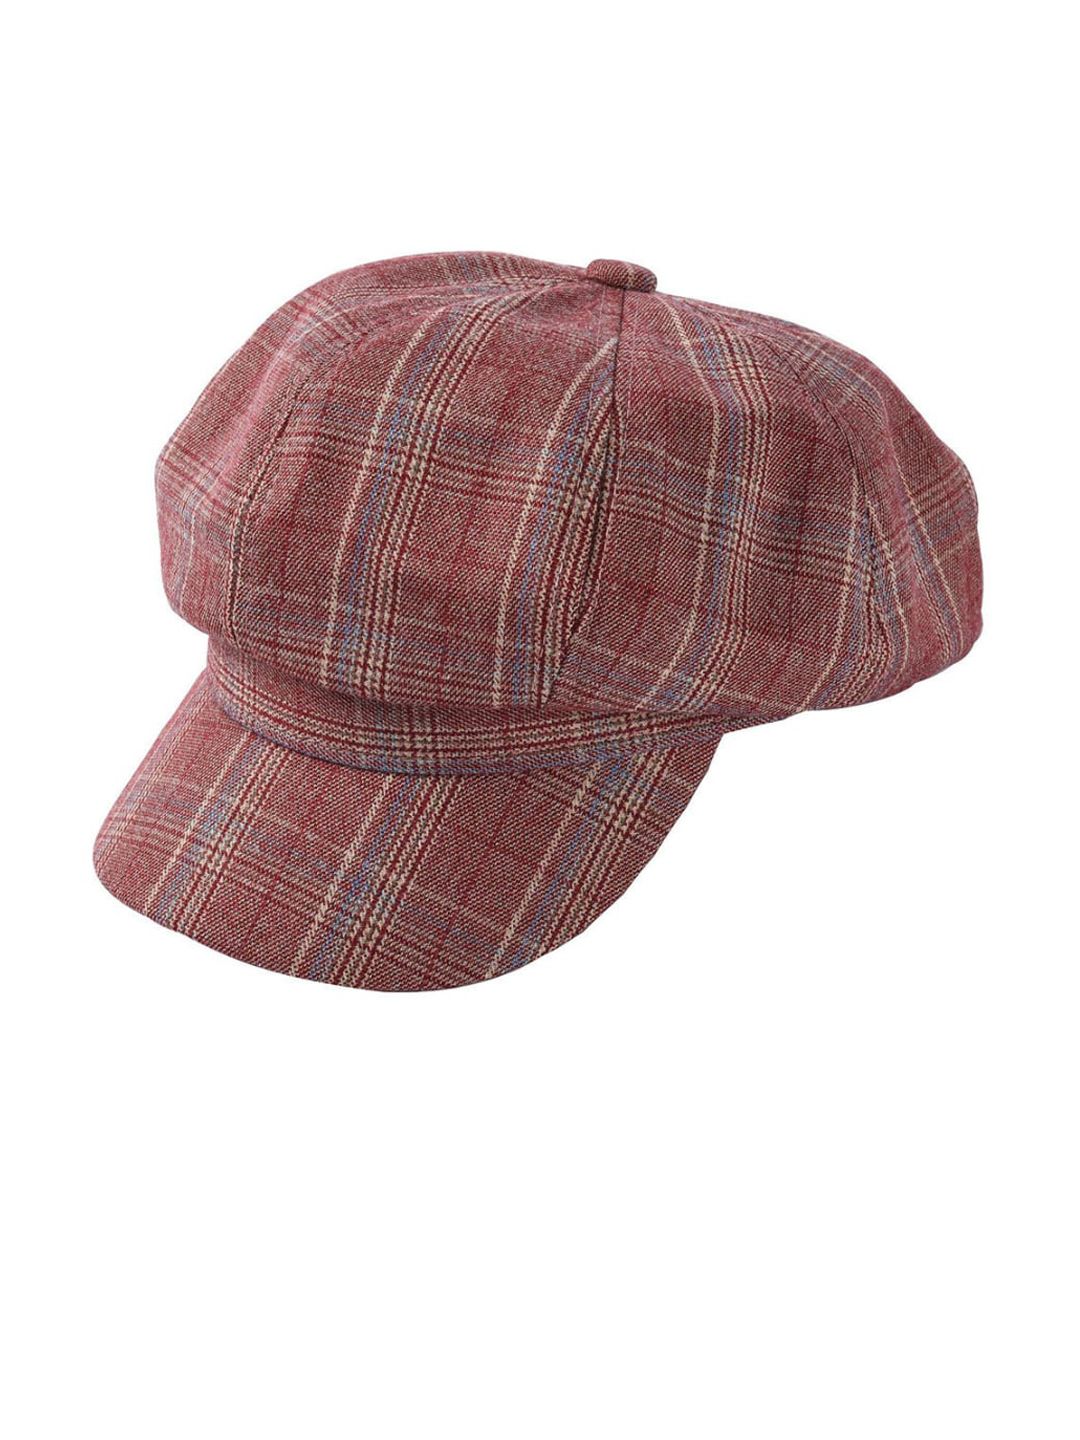 iSWEVEN Unisex Pink & Blue Checked Bakerboy Hat Price in India